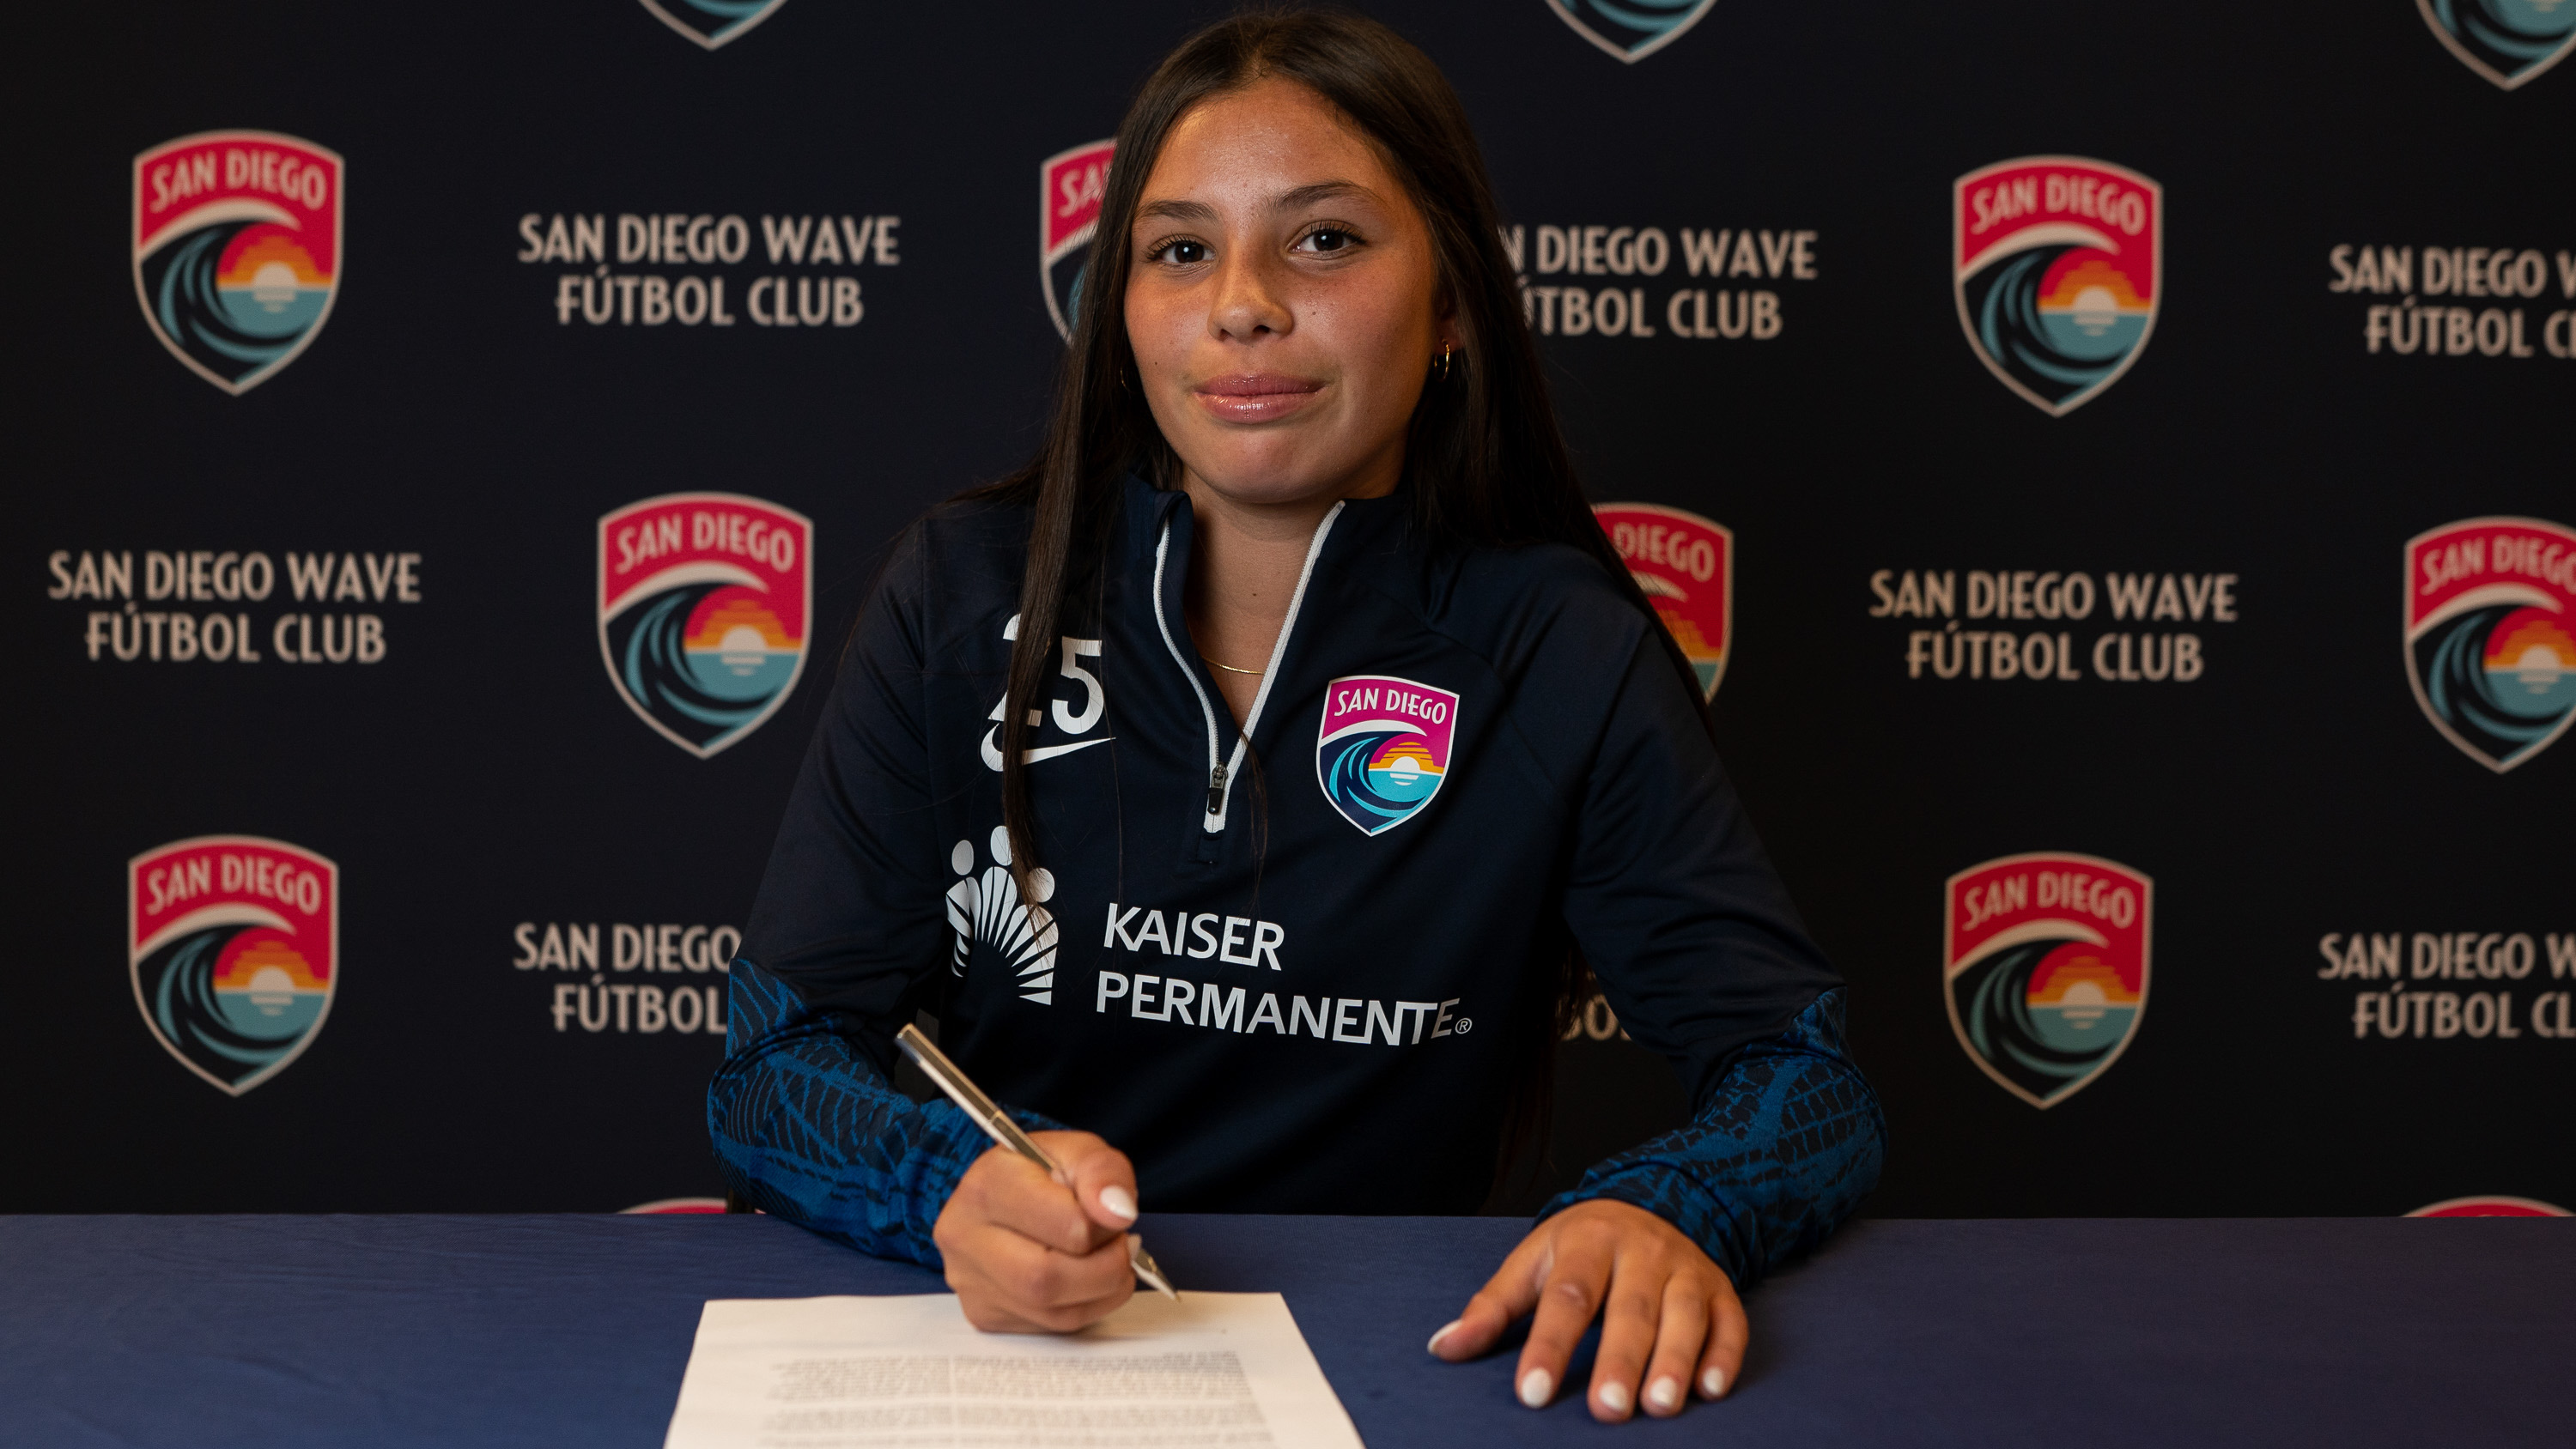 San Diego Wave signs Melanie Barcenas, becoming the youngest player in the NWSL.